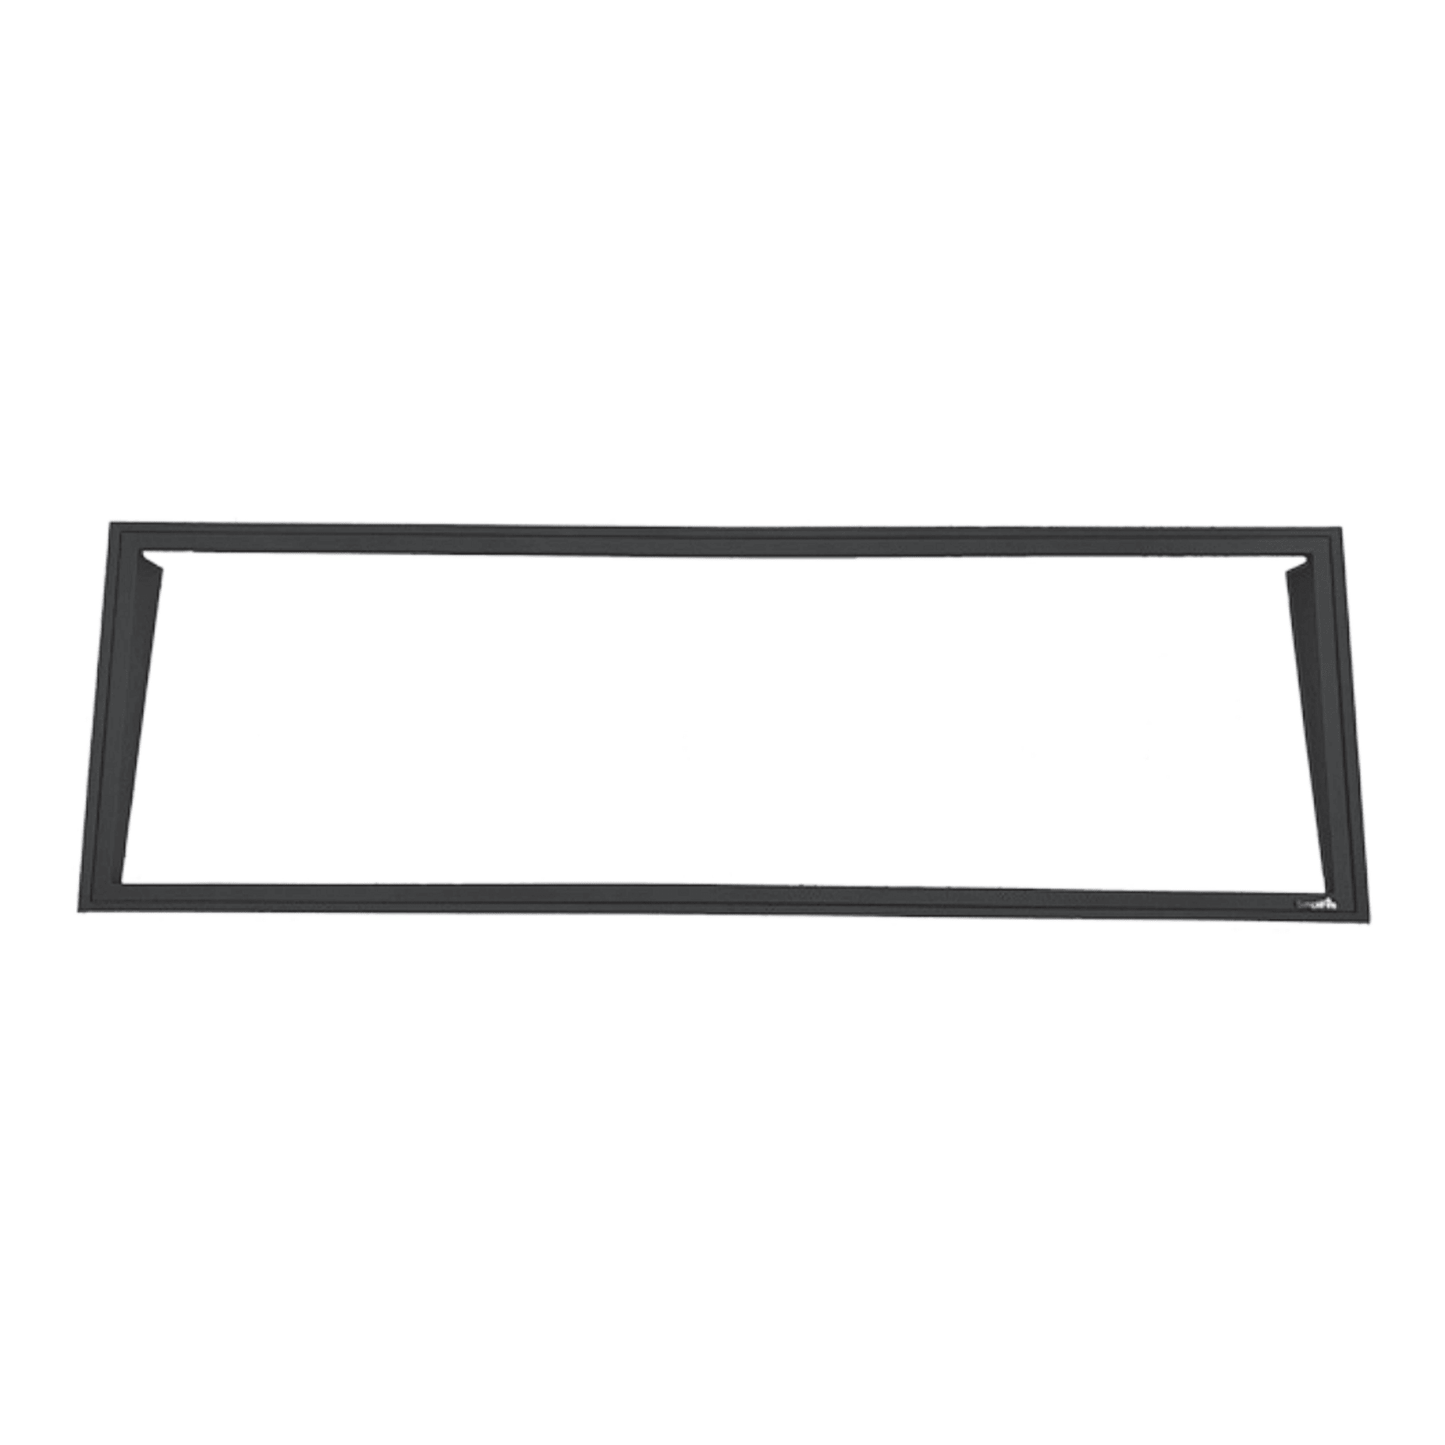 SimpliFire Standard Front for 43" Scion Fireplace